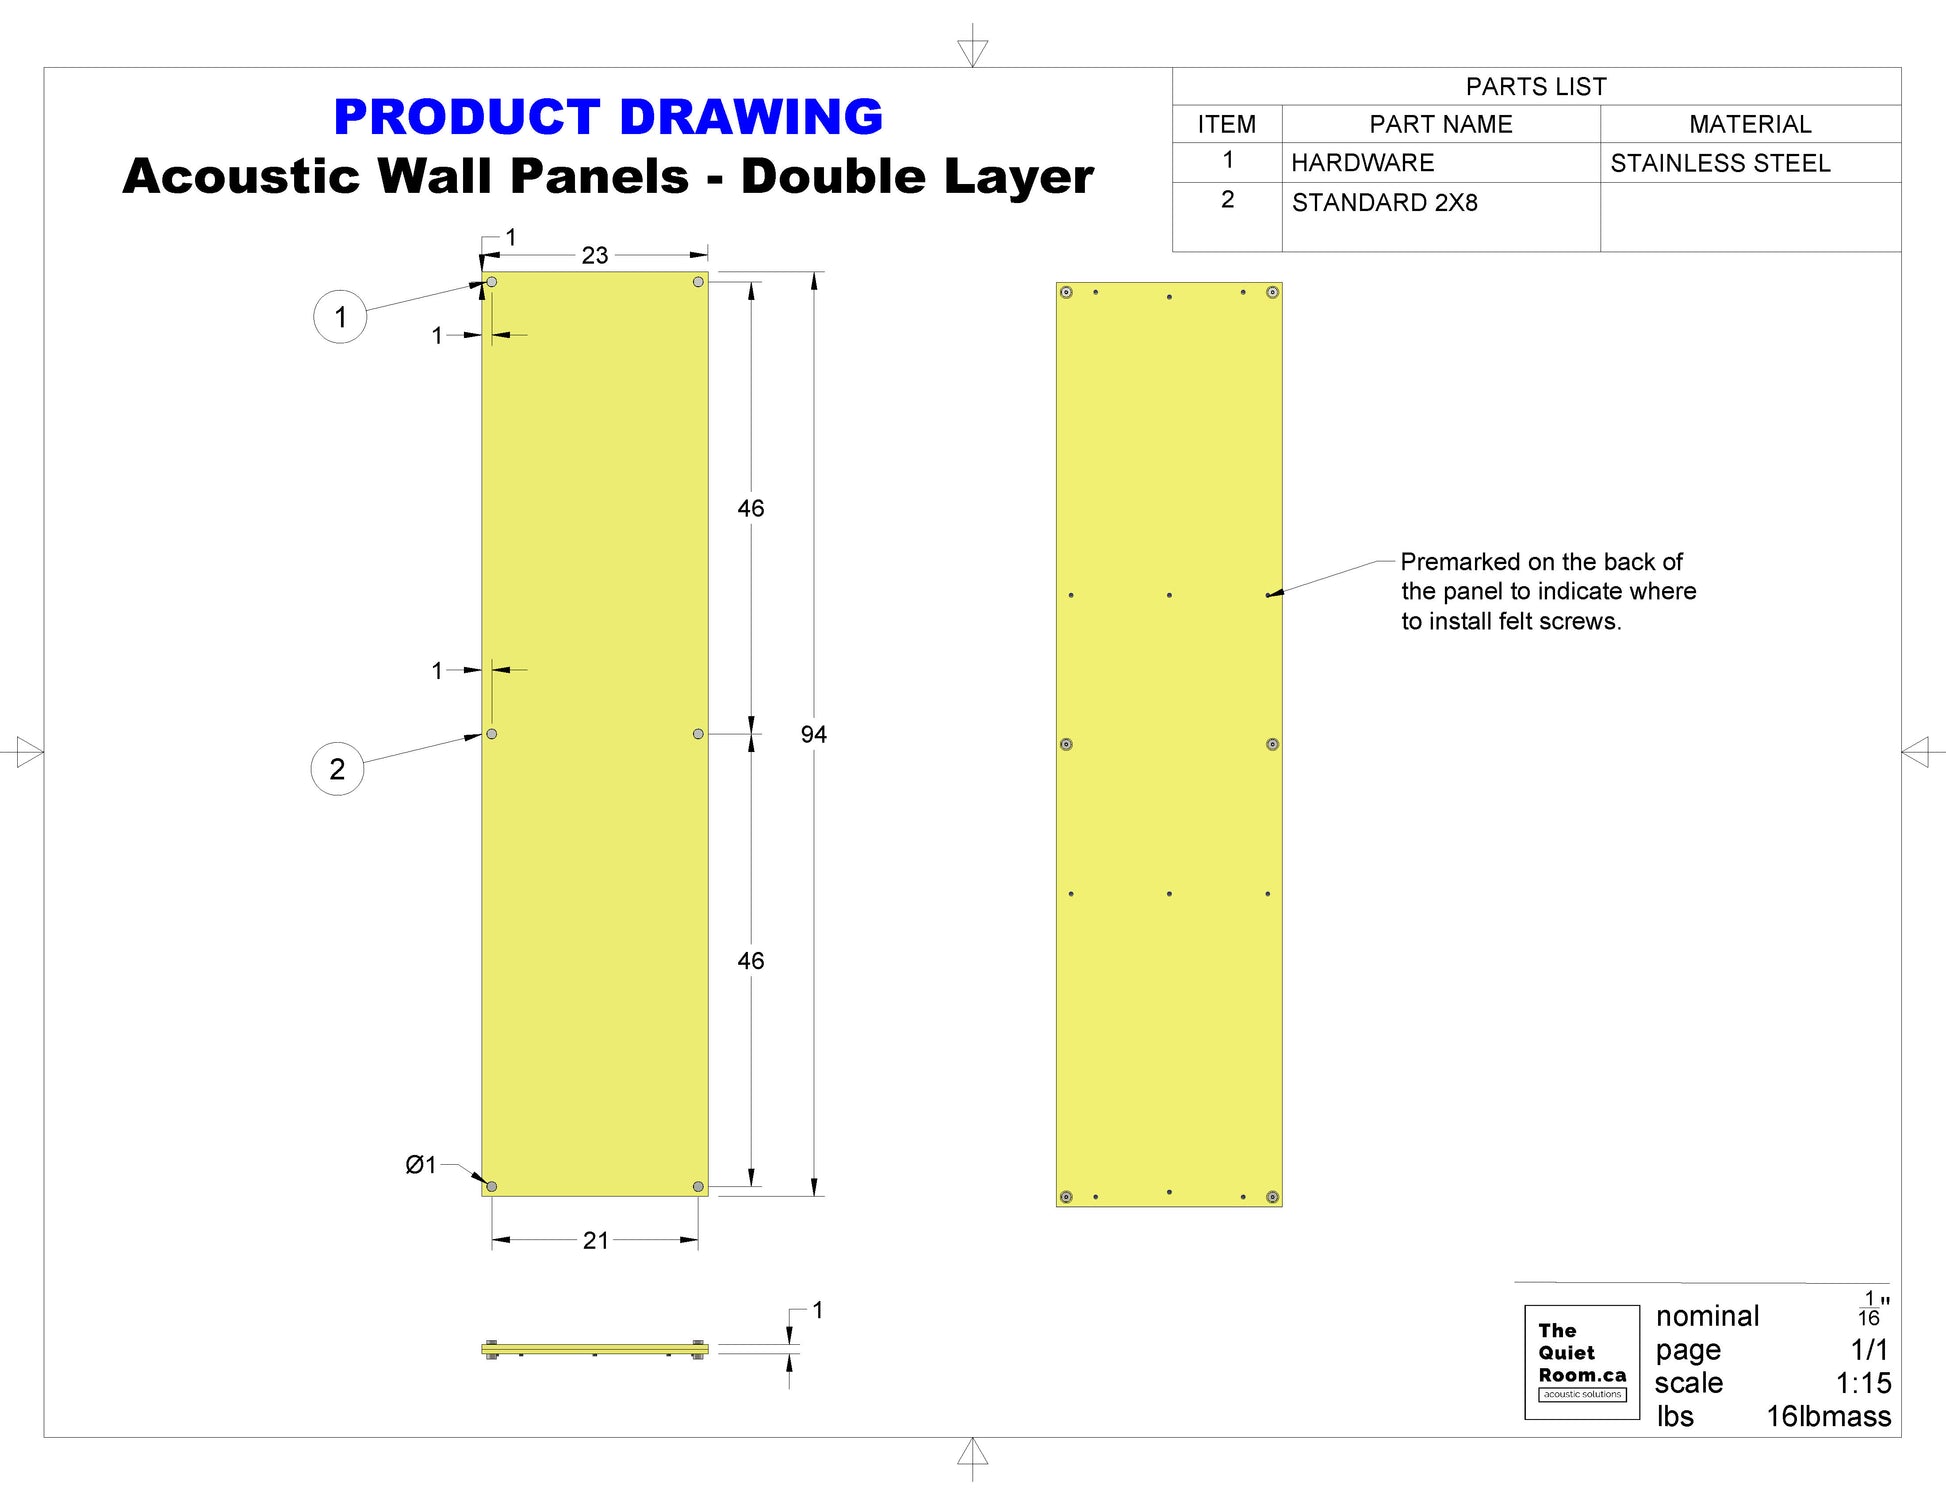 2x8_Acoustic_Wall_Panels_Drawing_assembly